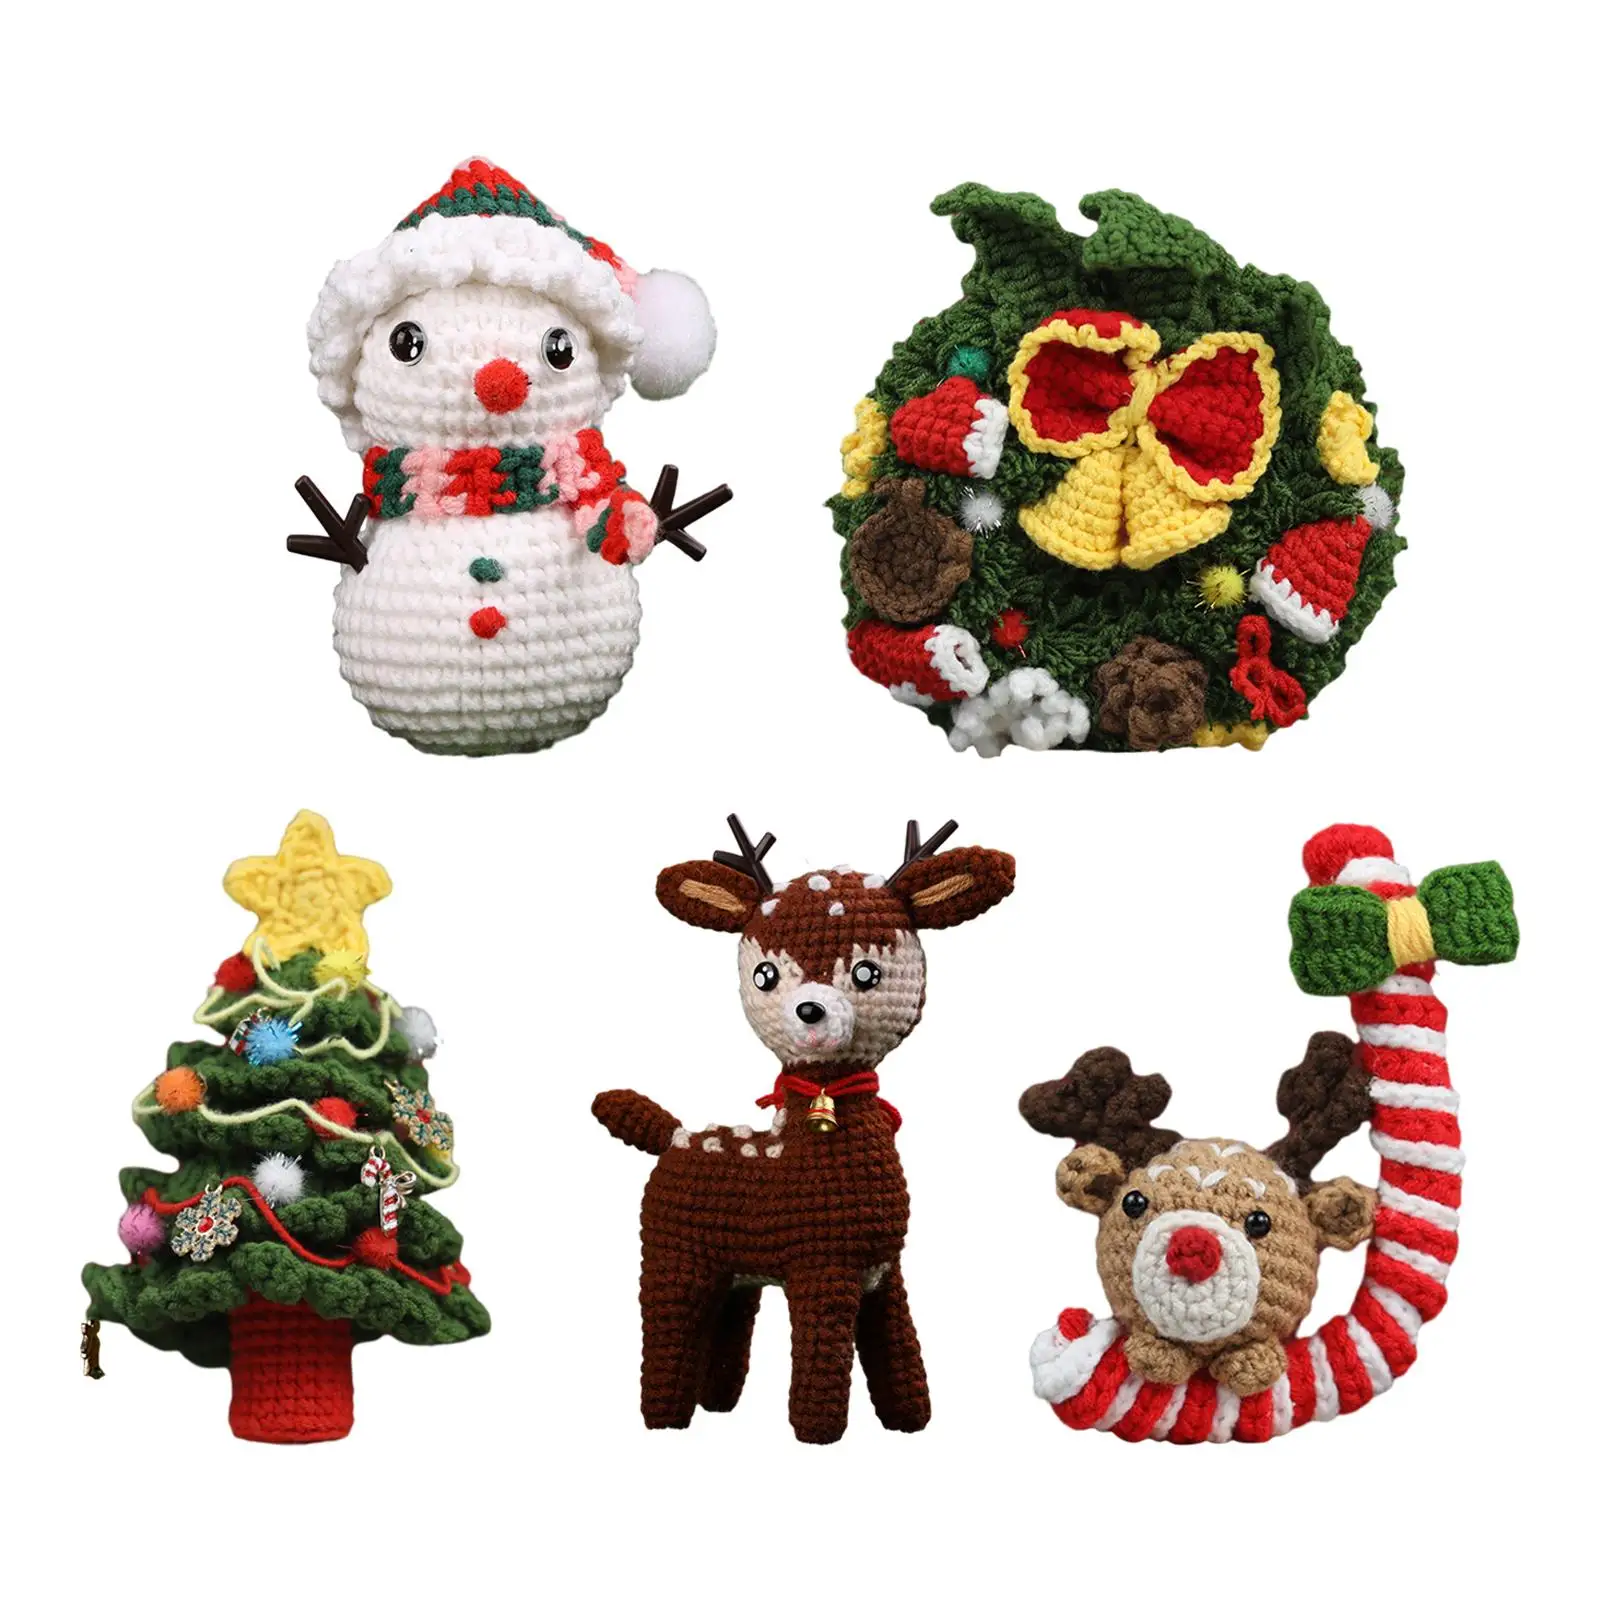 Crochet Starter Kits Ornament Make Your Own Doll Sewing Craft Crochet Craft Set for Christmas Gift Gift Porches Door Fireplaces